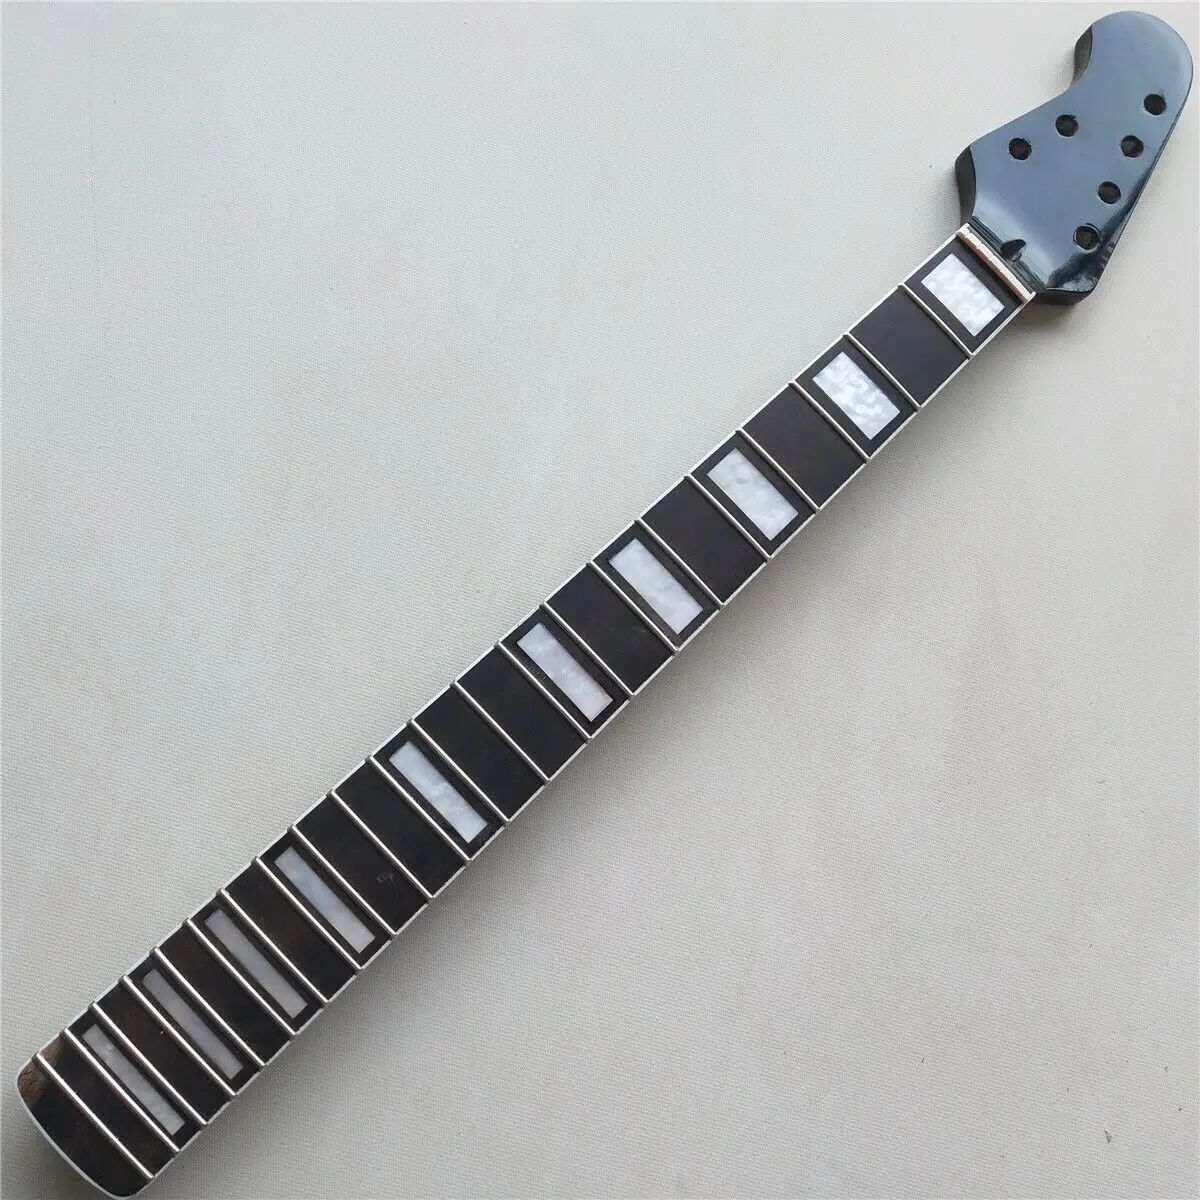 Reverse head Black 4+2 Tuners Guitar Neck 22Fret 25.5inch Rosewood Fretboard parts New Replacement enlarge